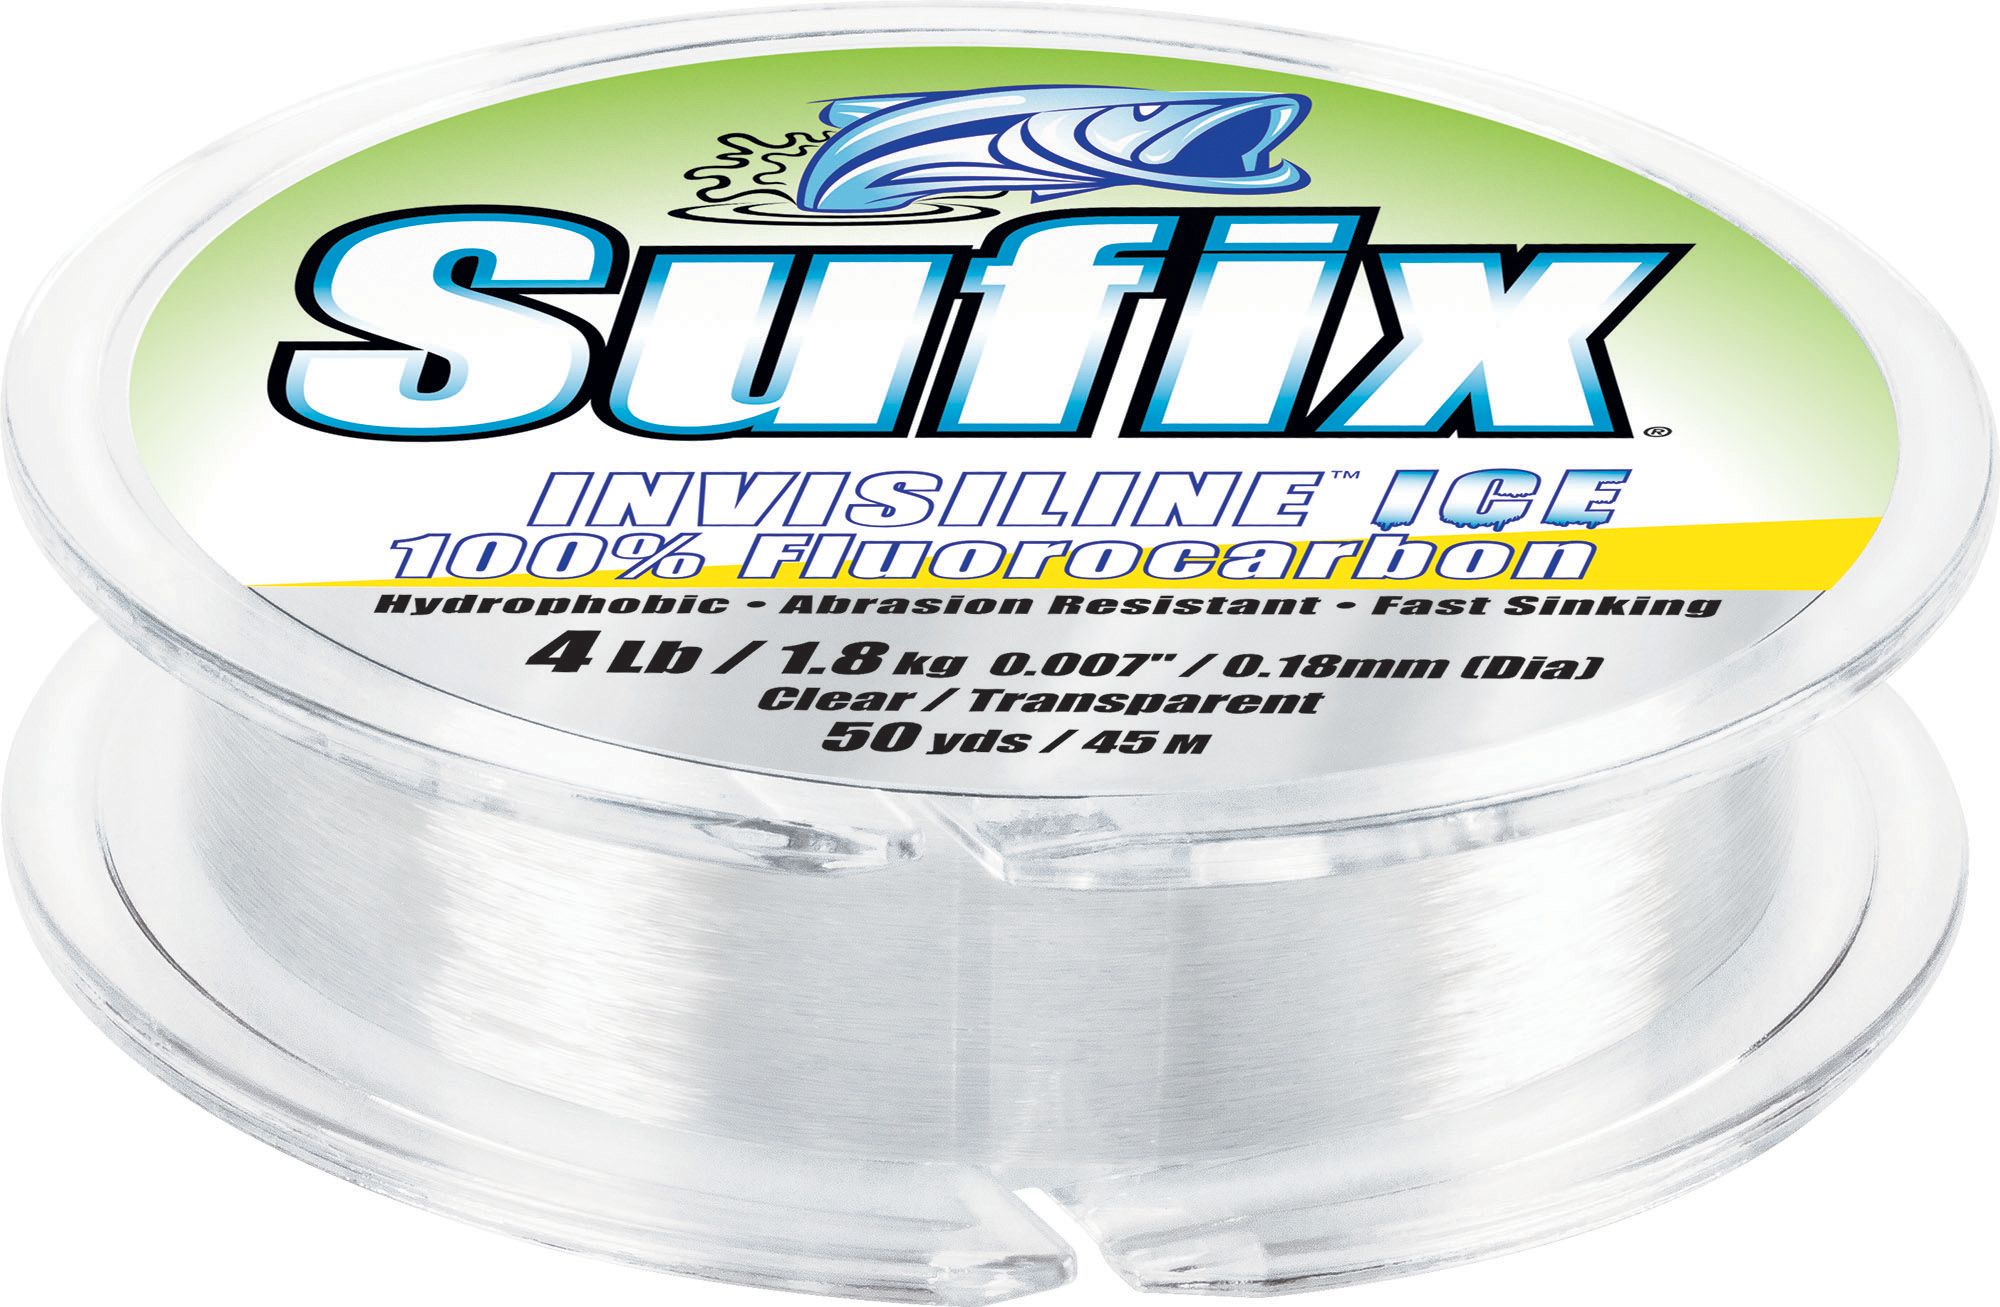 Sufix InvisiLine Ice Fluorocarbon Fishing Line | Dick's Sporting Goods